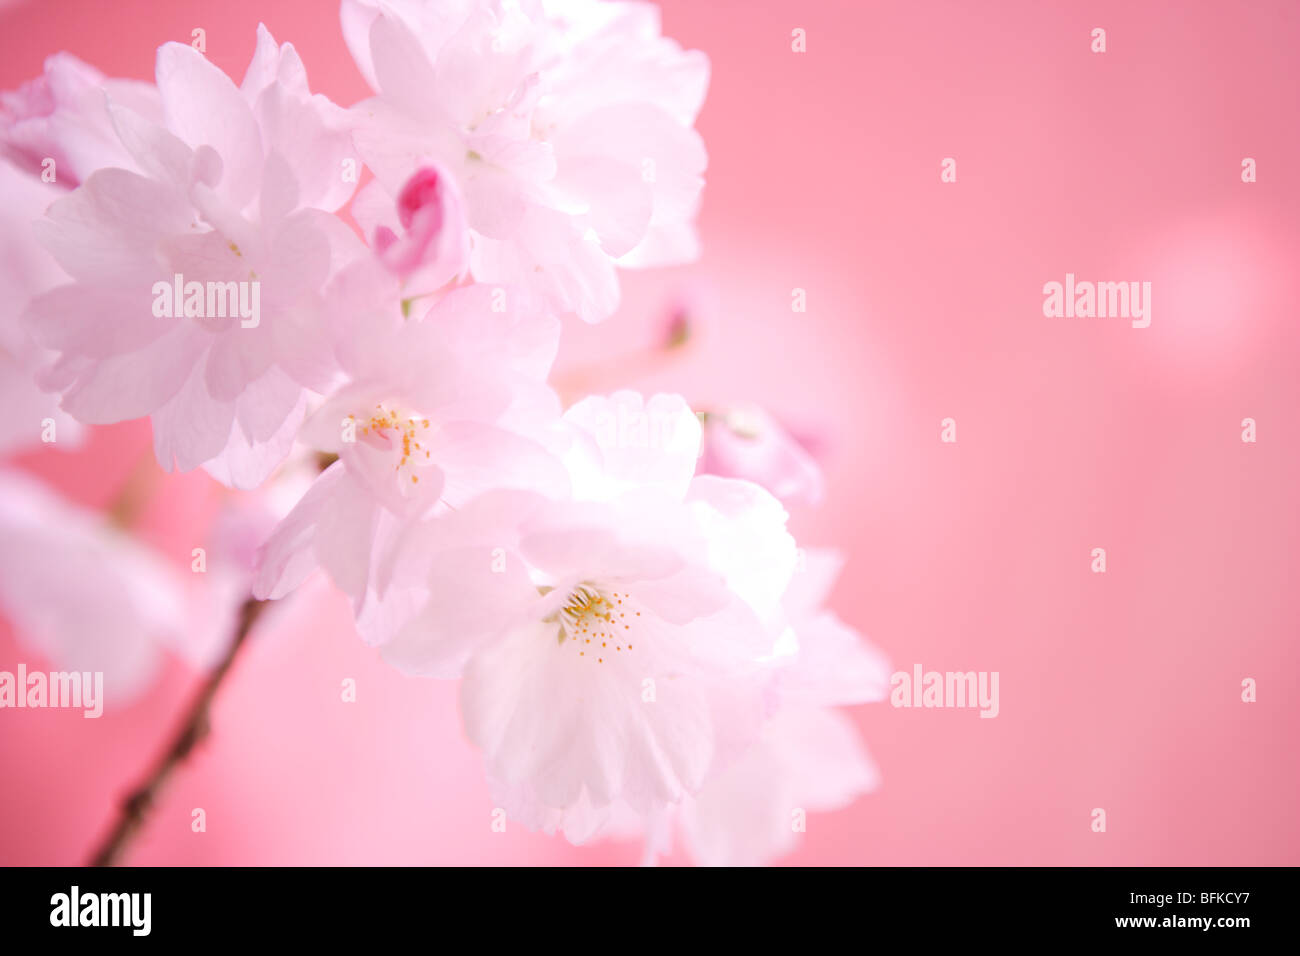 Close Up Image of Cherry Blossom Banque D'Images